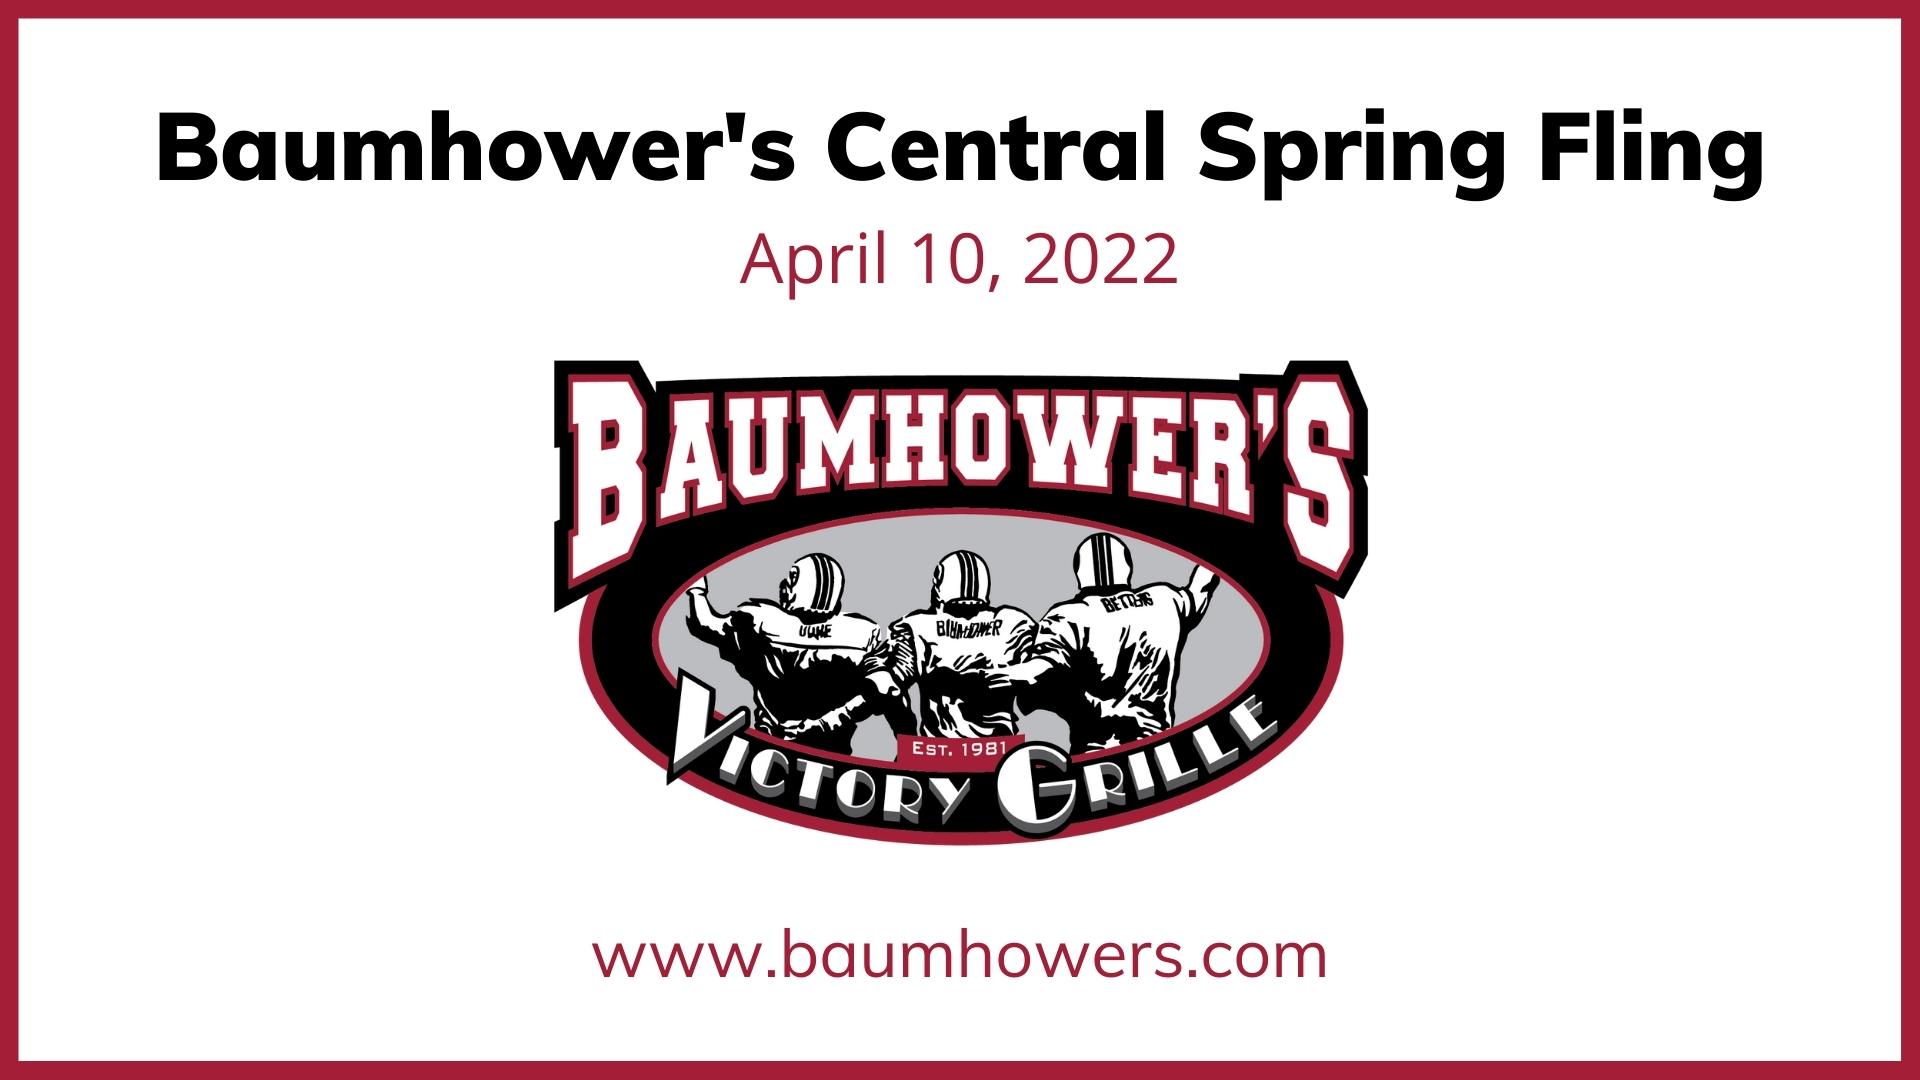 1920x1080 Central Spring Fling Baumhowers 4-10-22